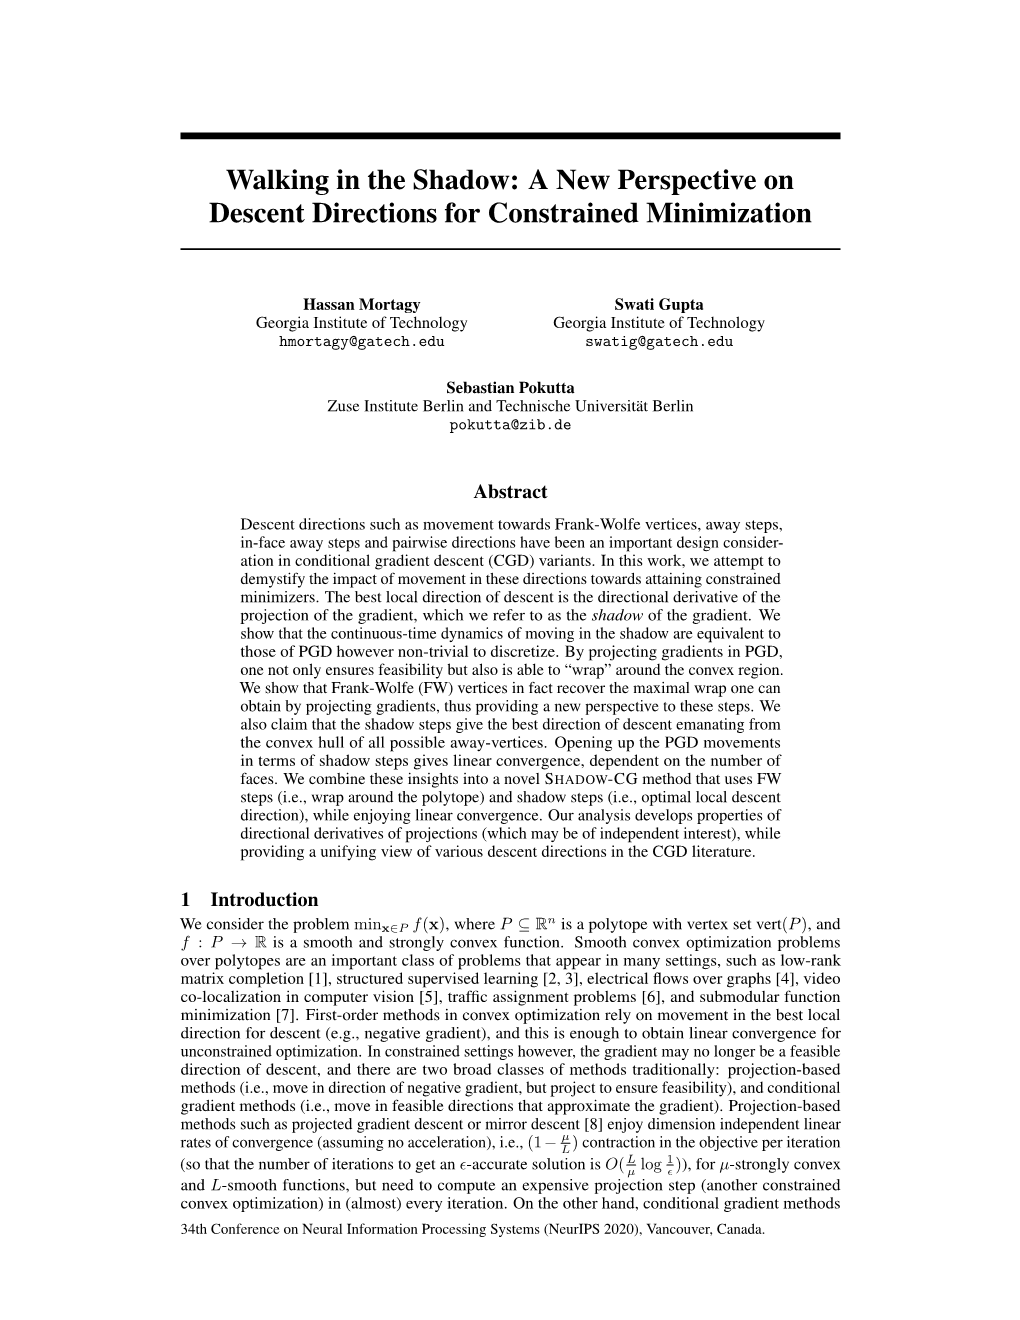 Walking in the Shadow: a New Perspective on Descent Directions for Constrained Minimization